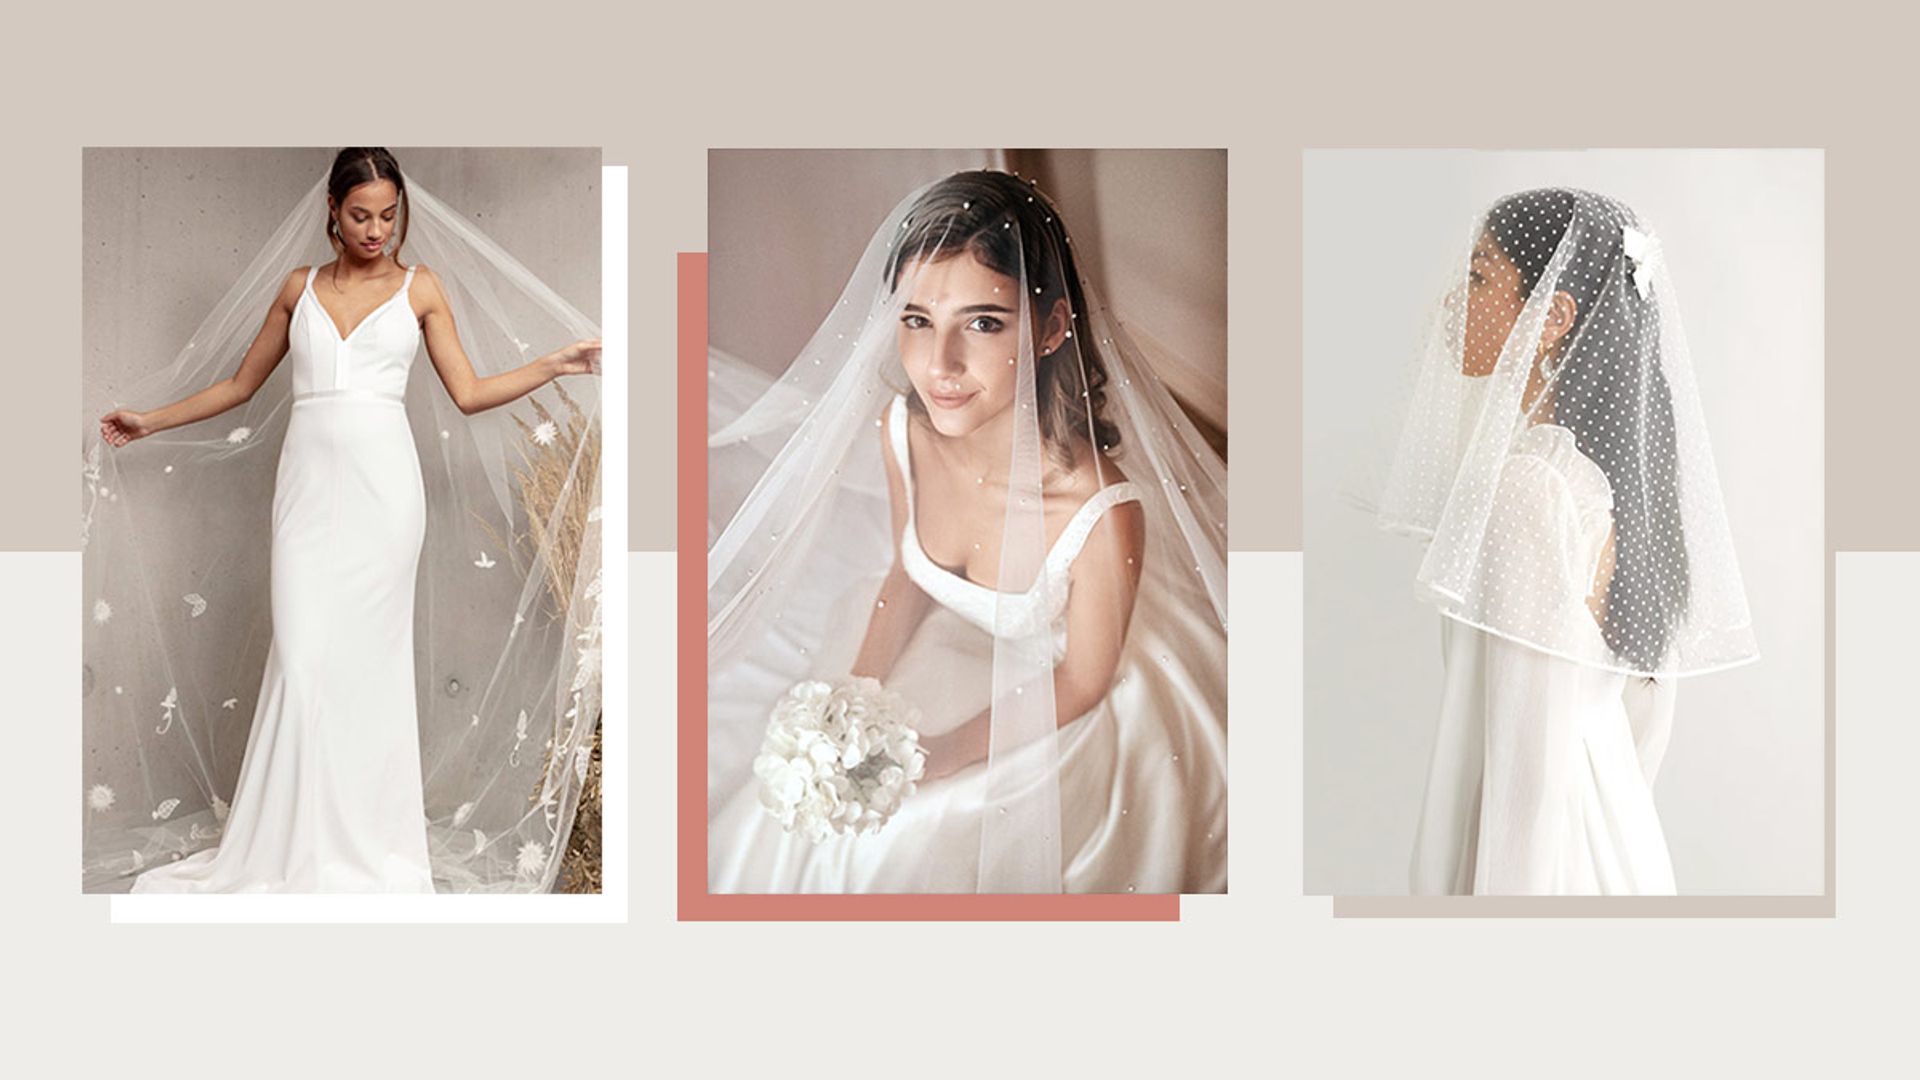 21 of the best wedding veils to choose from for a beautiful bridal moment